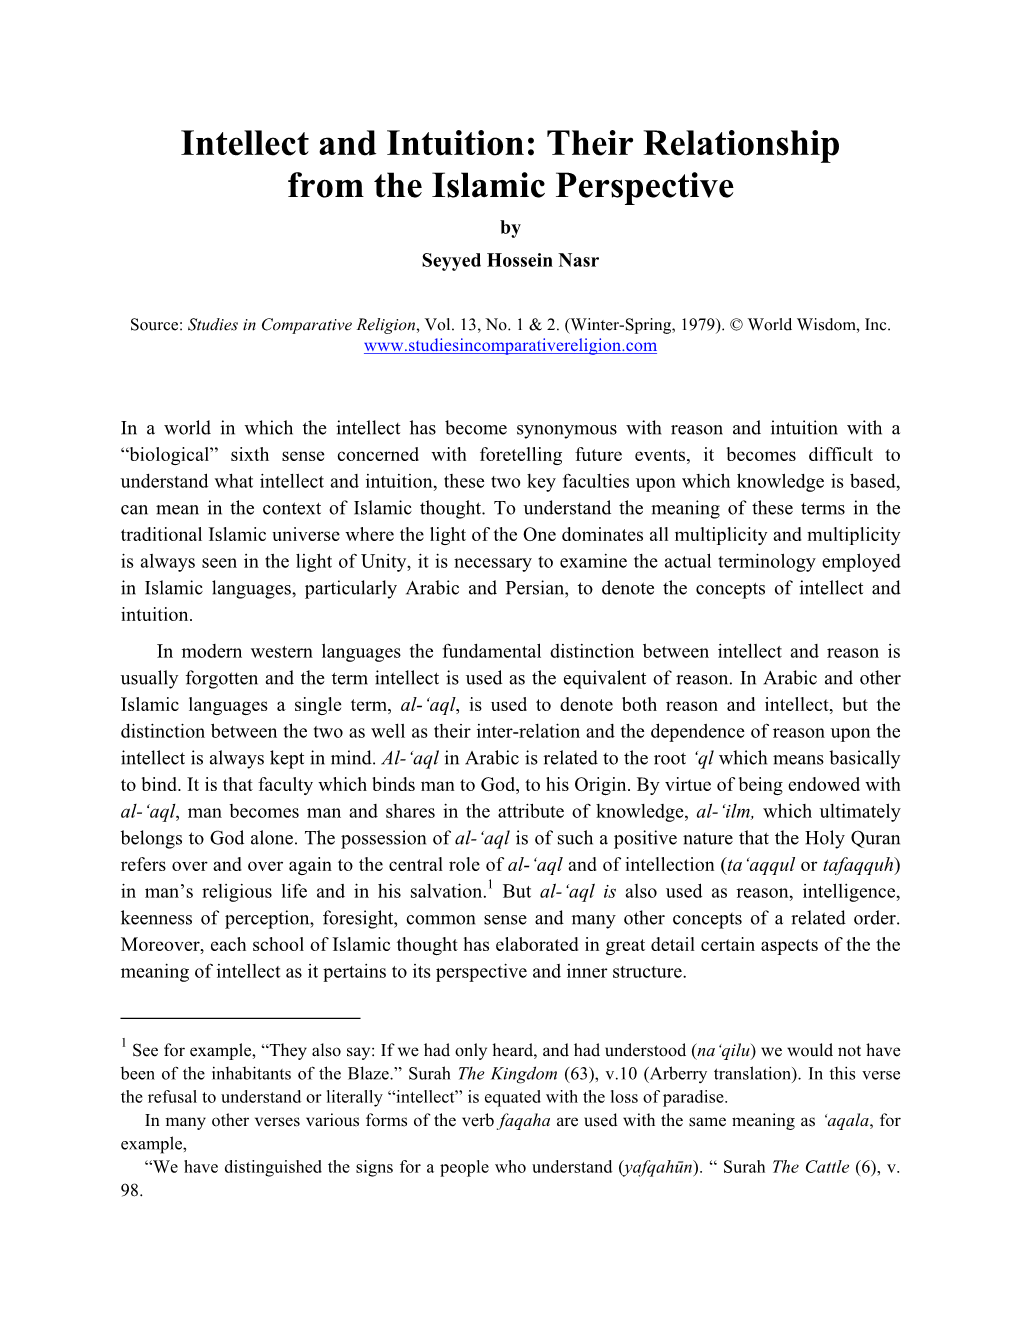 "Intellect and Intuition: Their Relationship from the Islamic